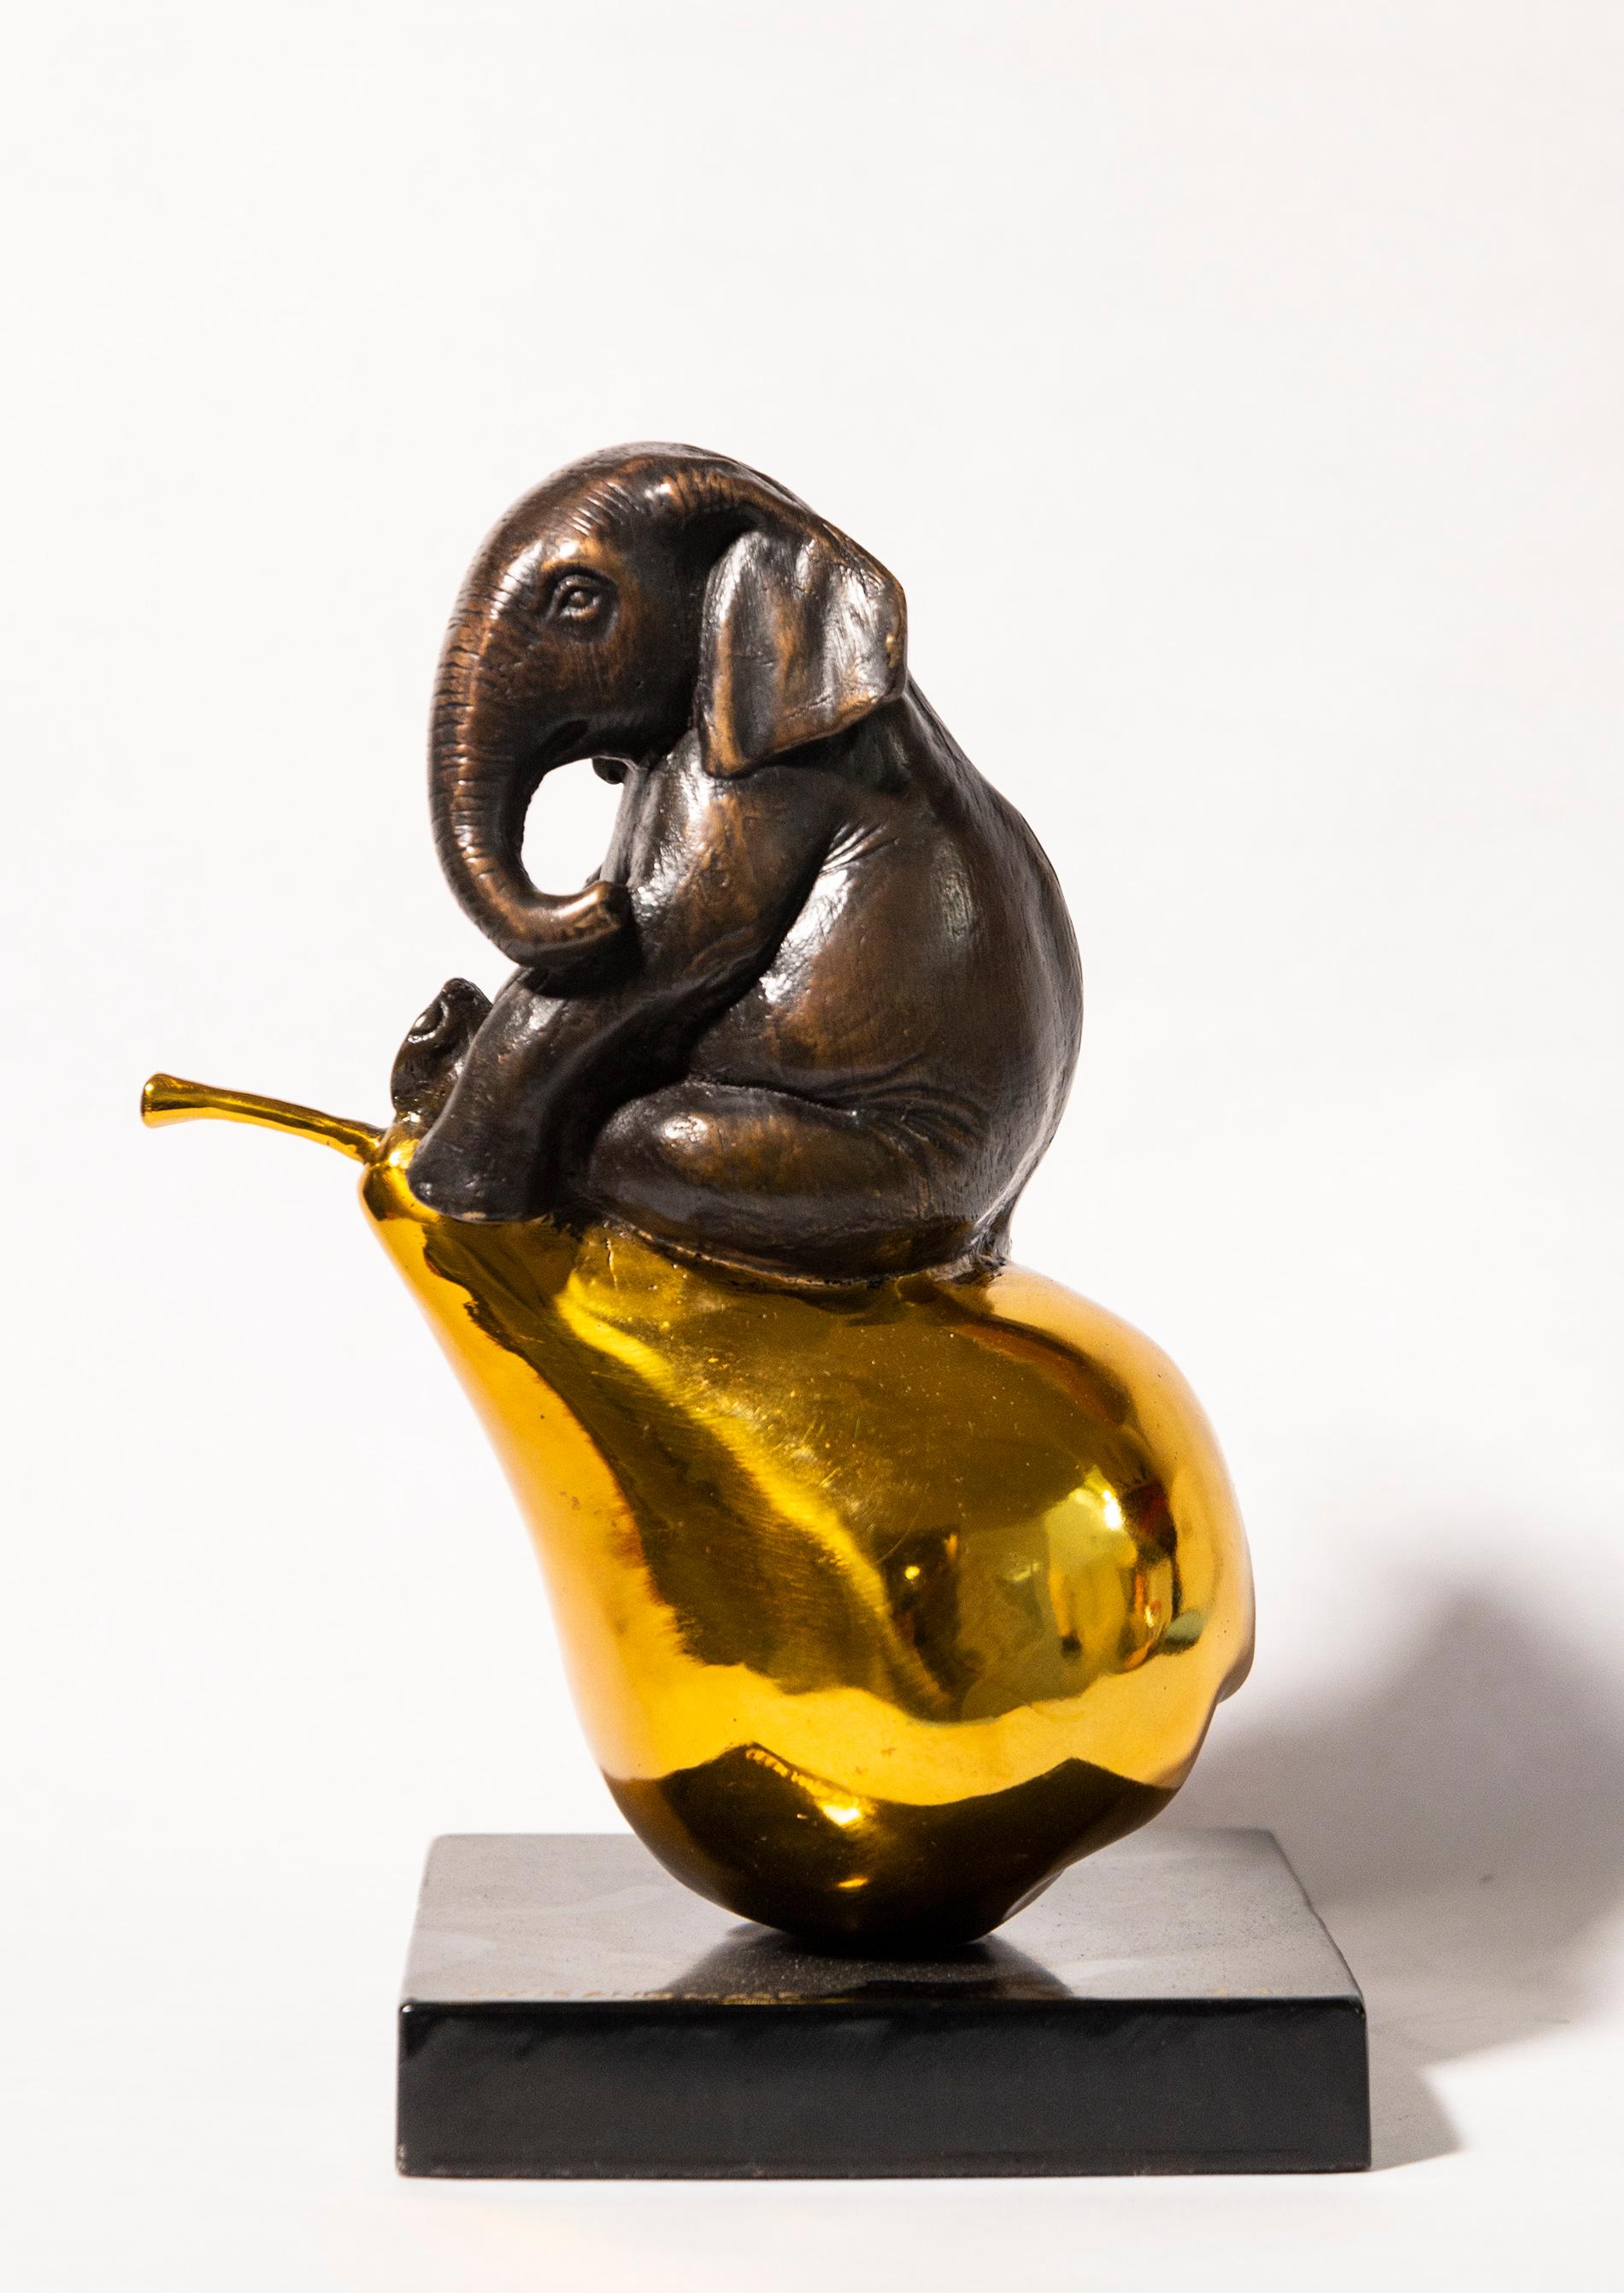 Gillie and Marc Schattner Figurative Sculpture - The elephant was just pearfect 2/40 - playful, contemporary, bronze sculpture